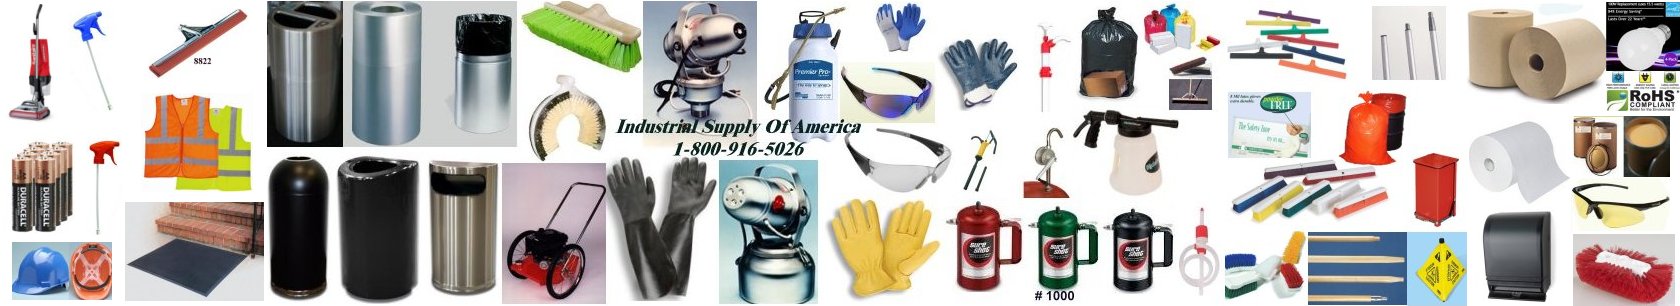 Industrial Cleaners Business Store